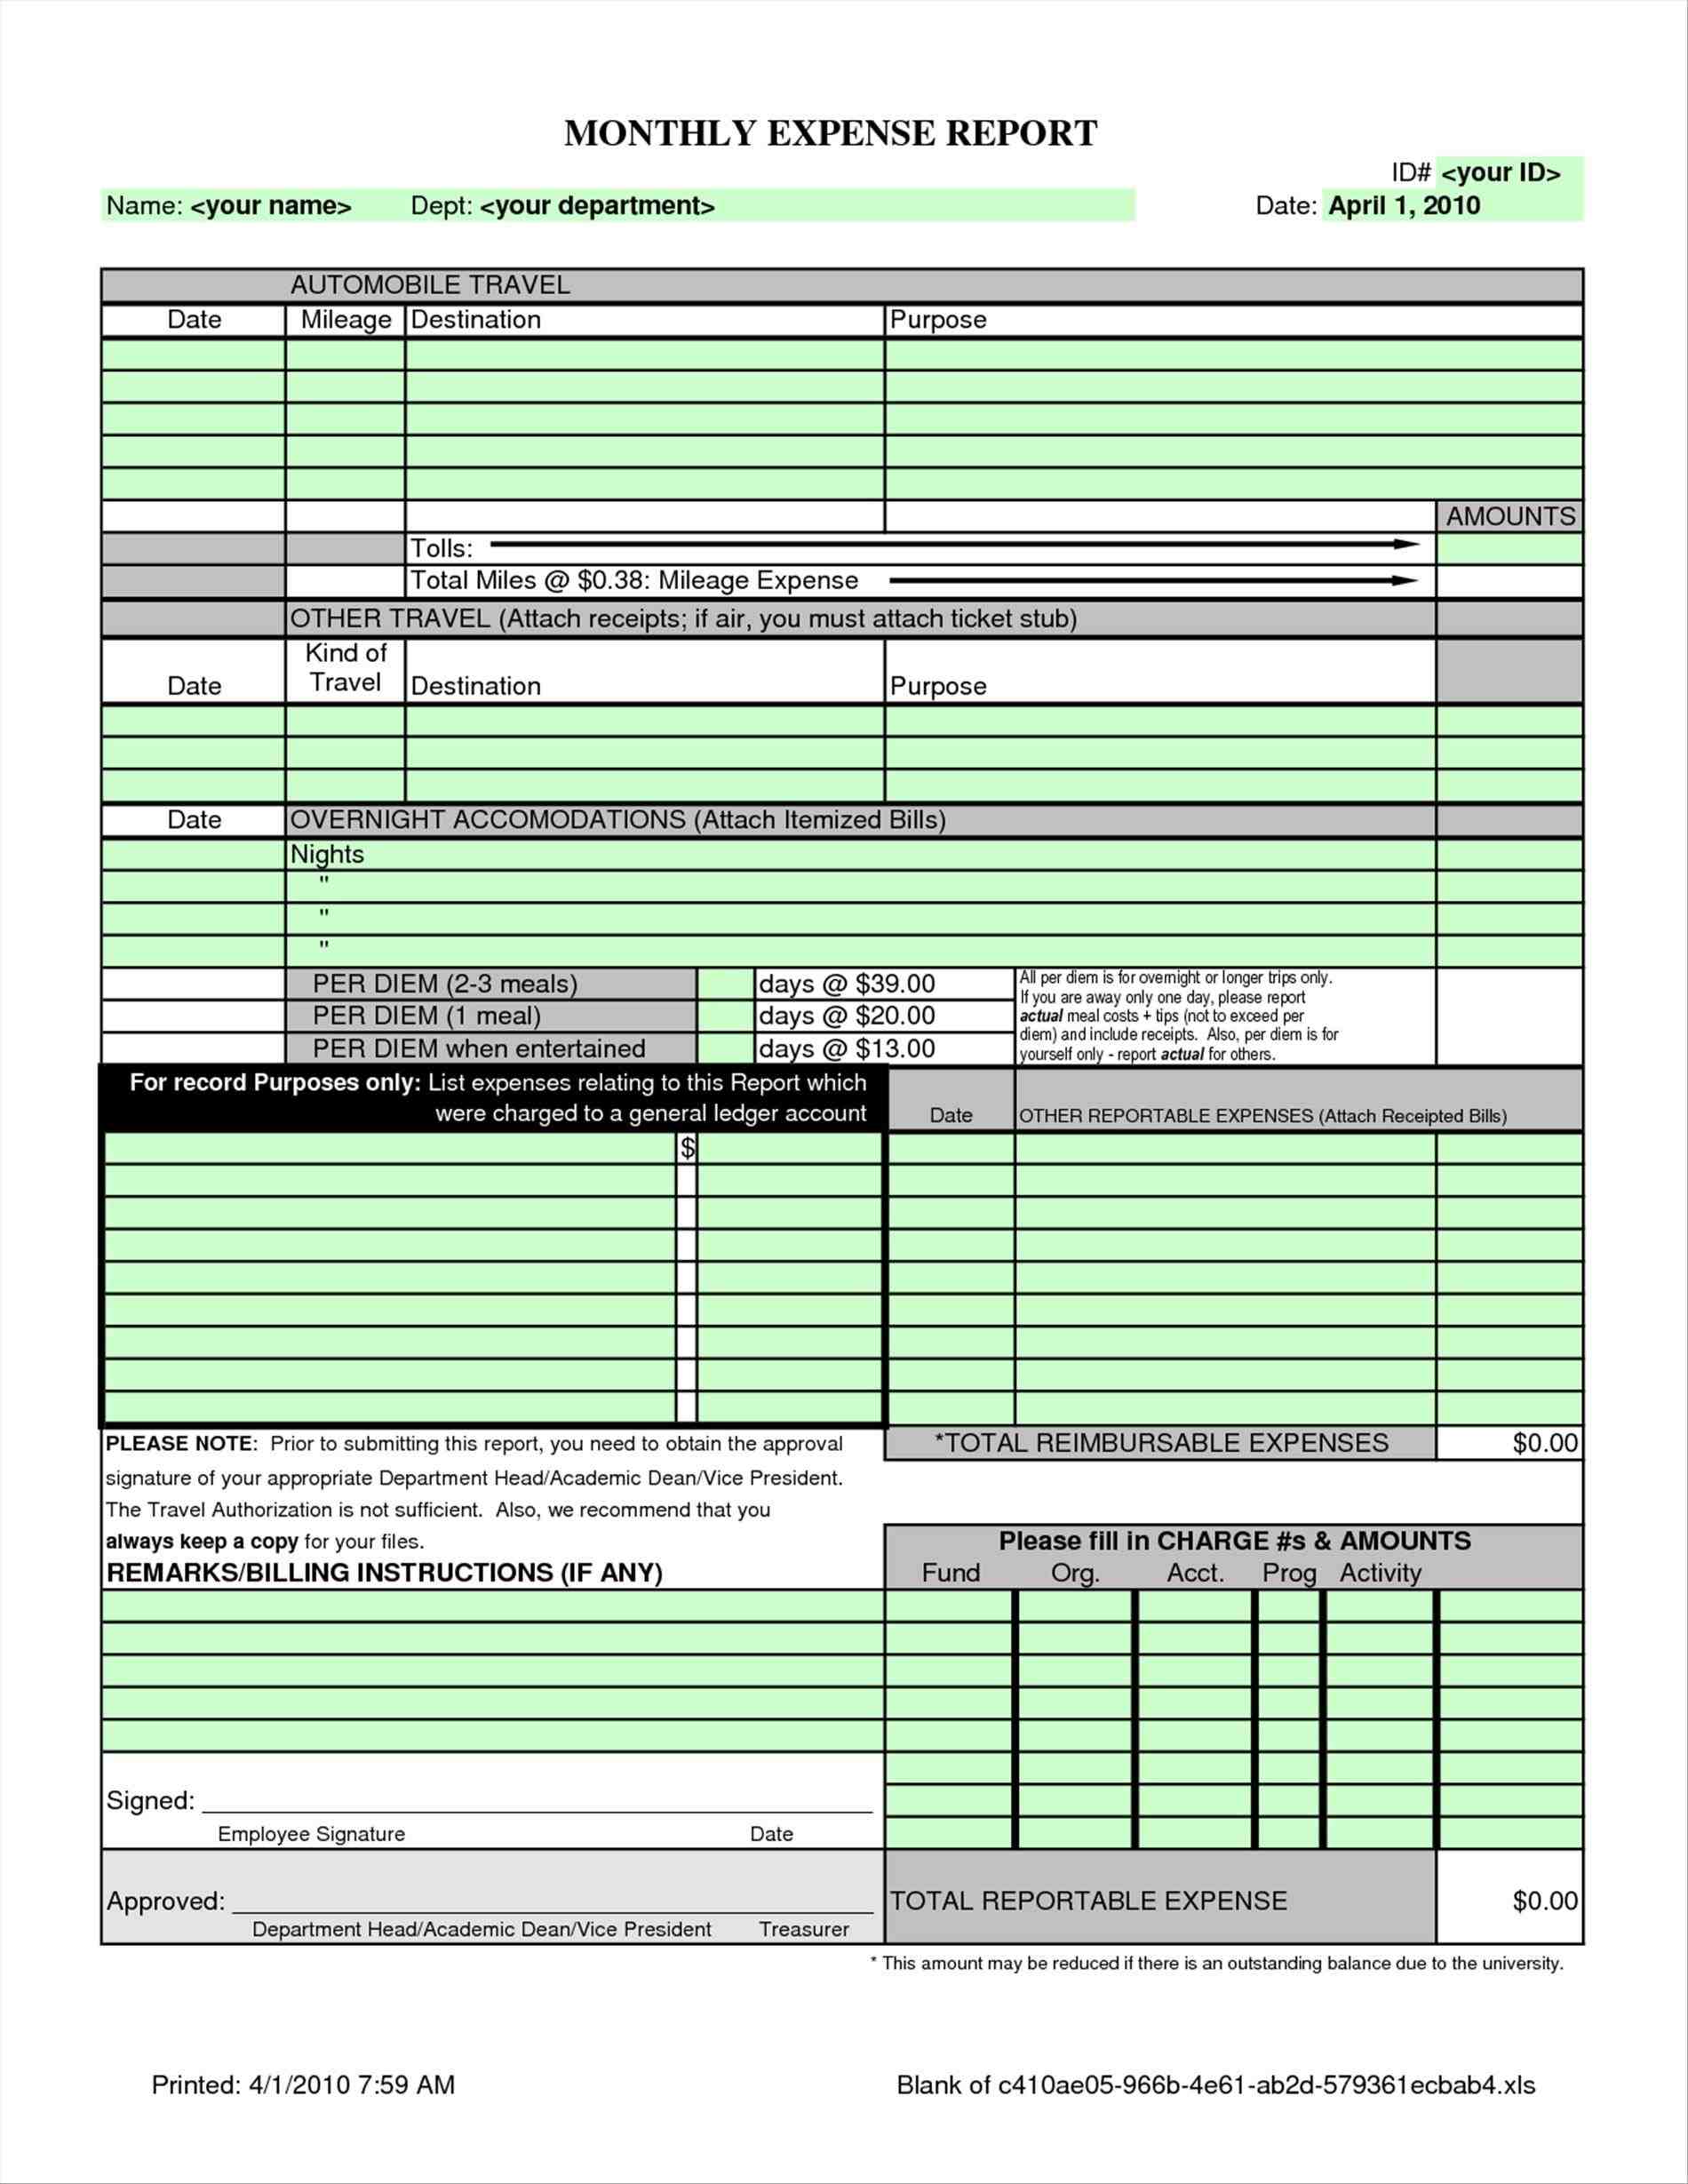 free Monthly Expense Report Template expense report templates smartsheet small business monthly and template sample vlashed small Monthly Expense